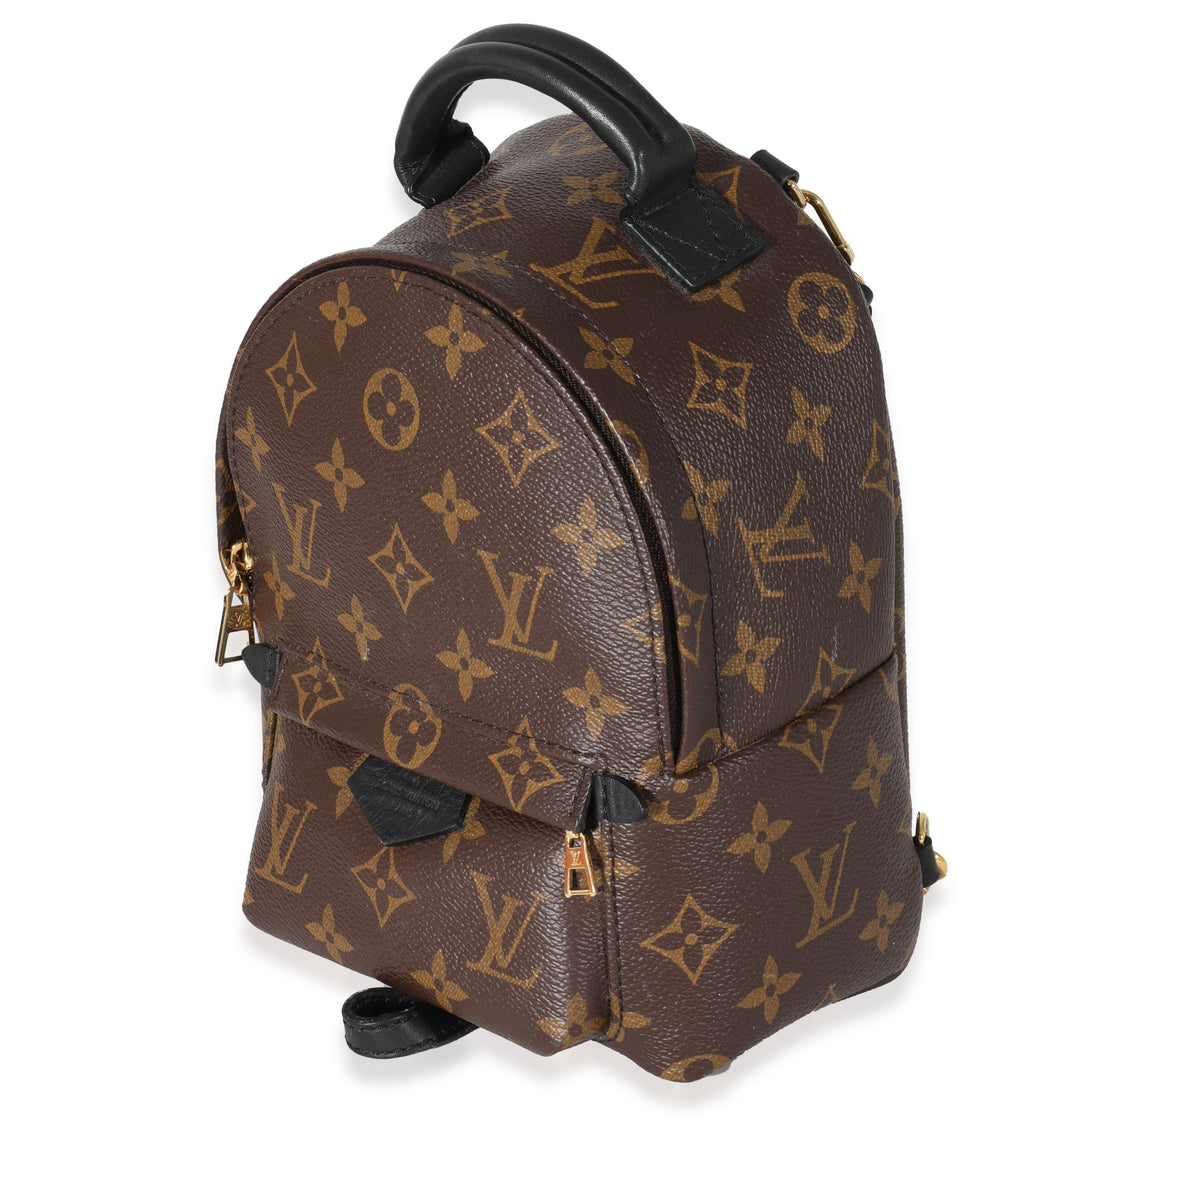 Which one is better mini backpack? LV Palm Springs Mini vs Montsouris BB  compare LV backpack 